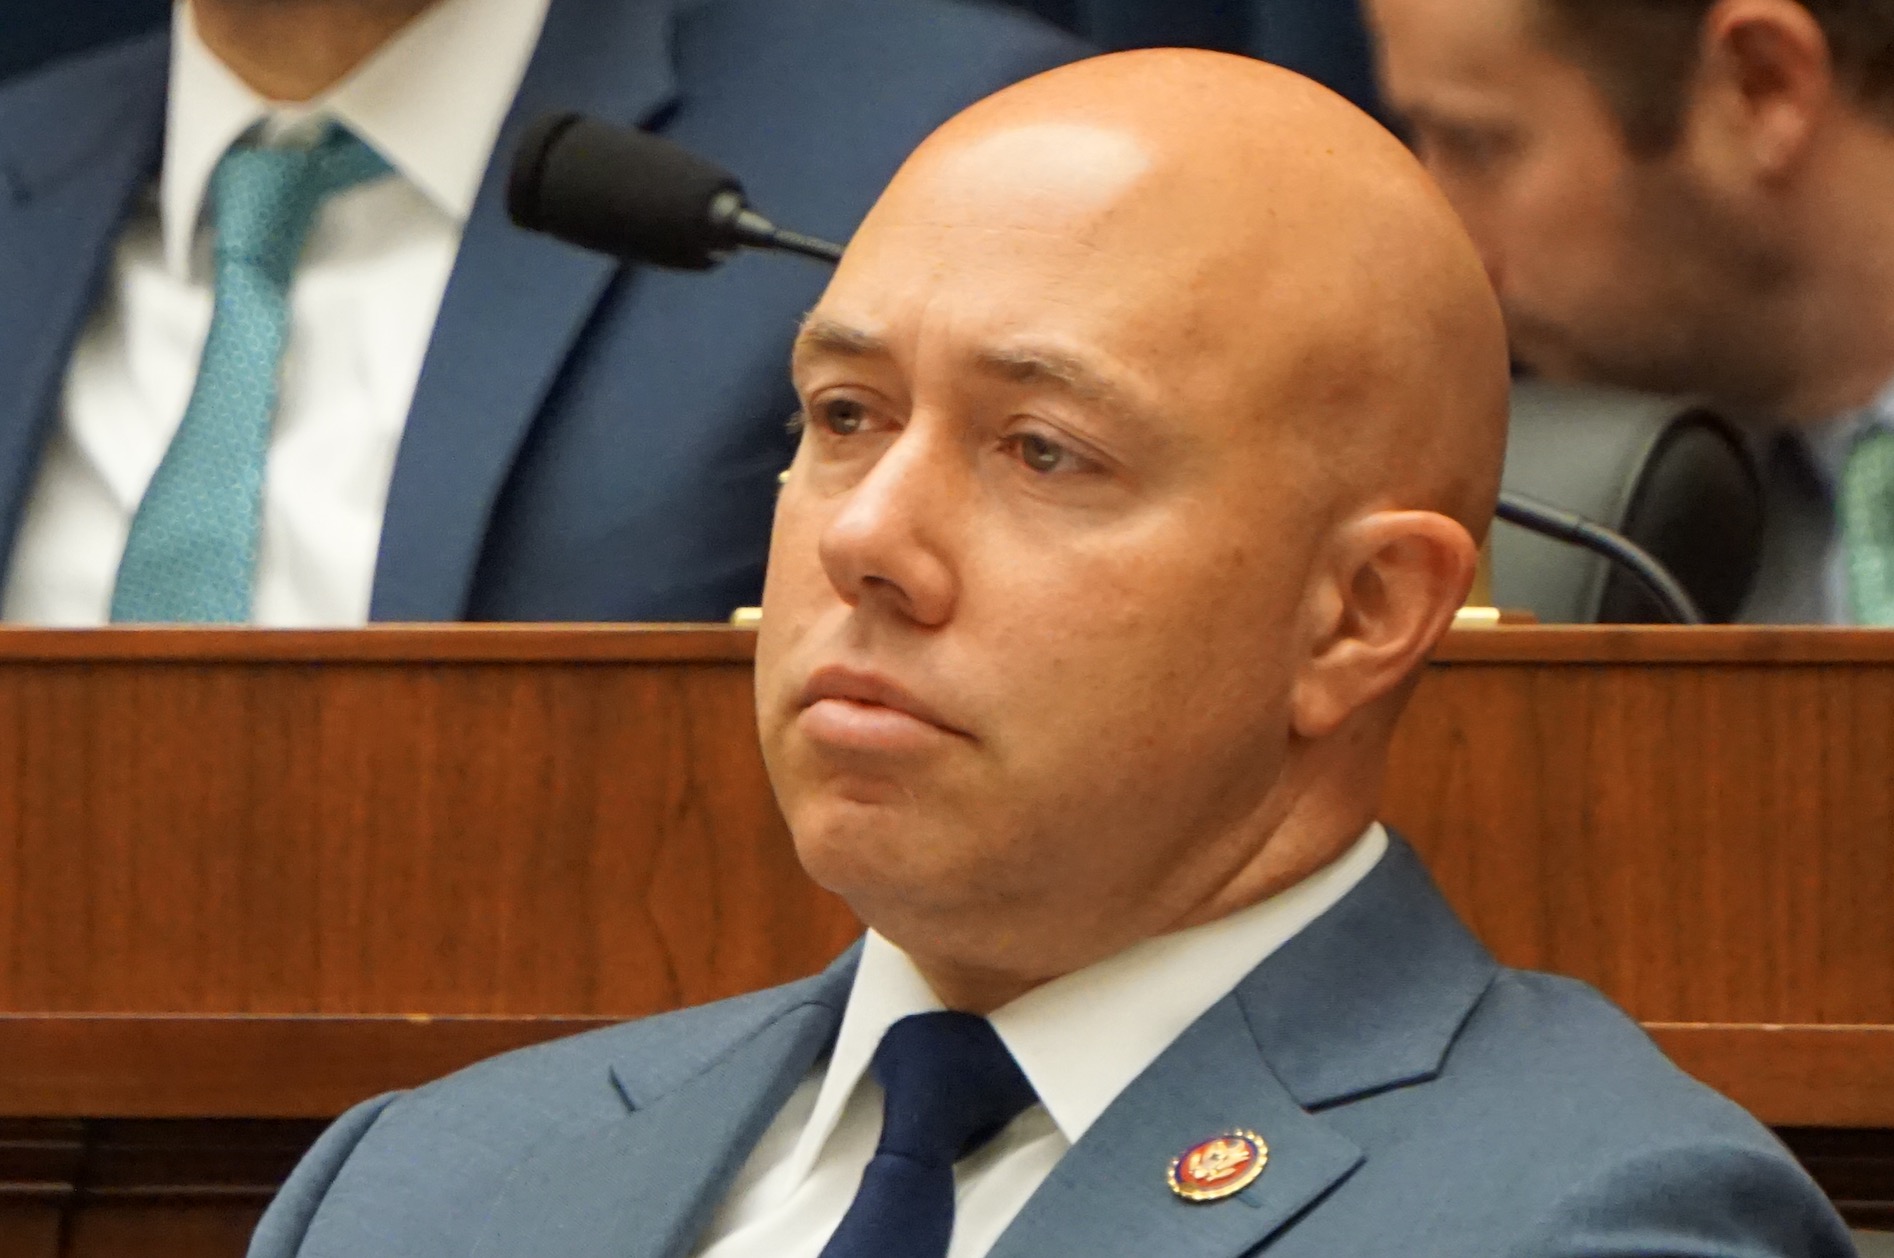 Rep. Brian Mast will oppose certification of 2020 election